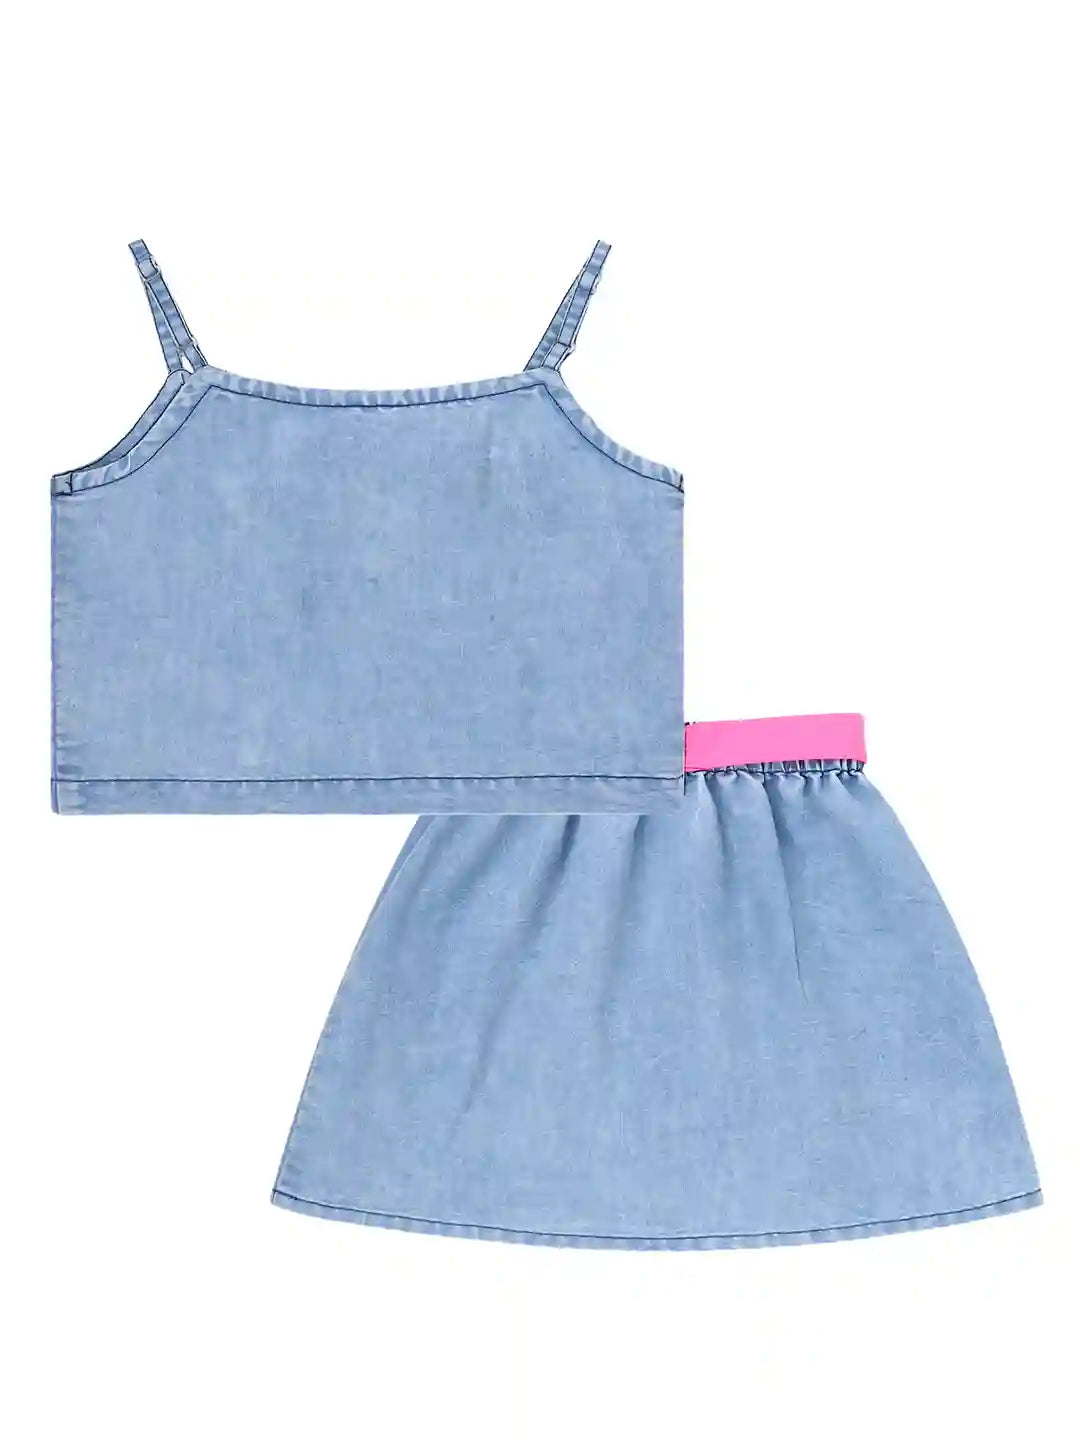 Girls Pure Cotton Denim Top with Skirt Co-ord Set, Blue Colour